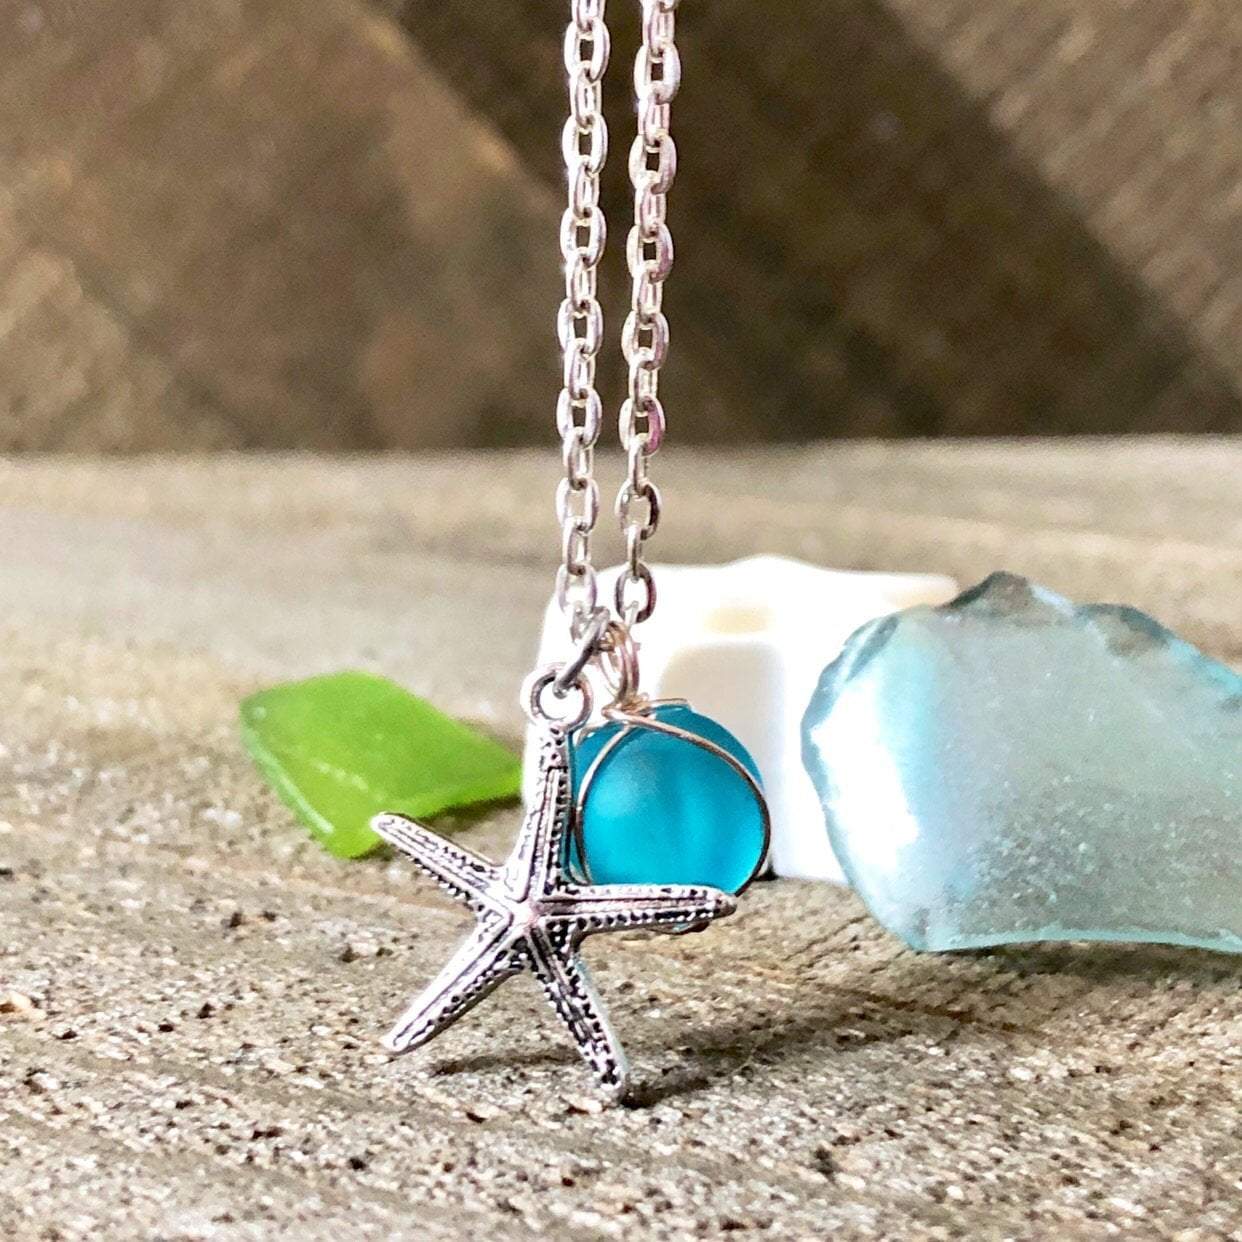 Hand Stamped Trinkets Necklace Seaglass Marble and Starfish Necklace - Blue Green Sea Glass